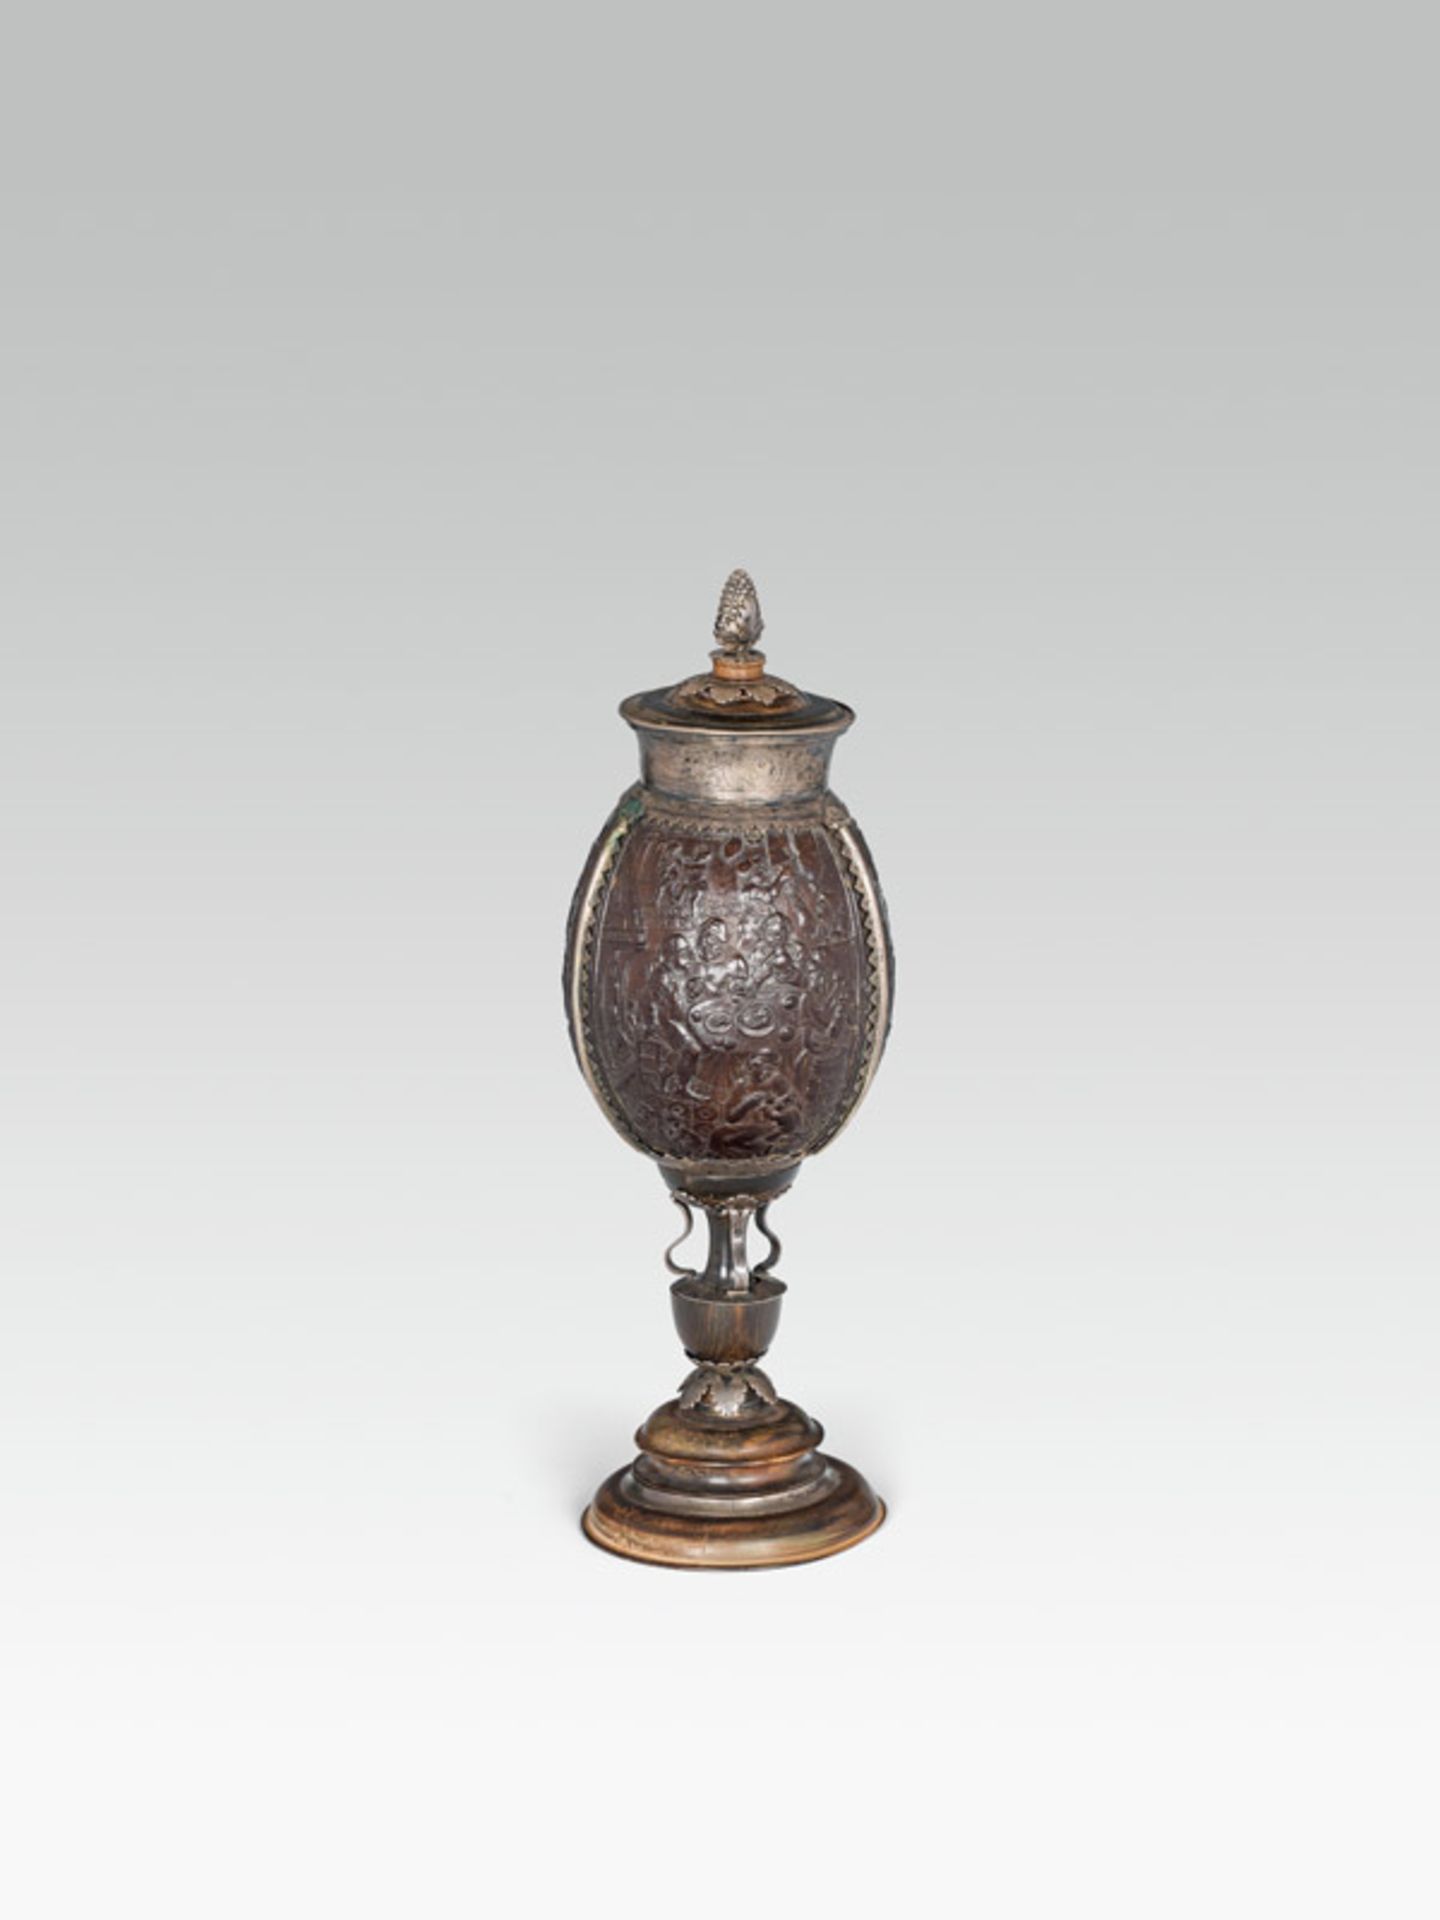 Coconut goblet, Germany, 17th century